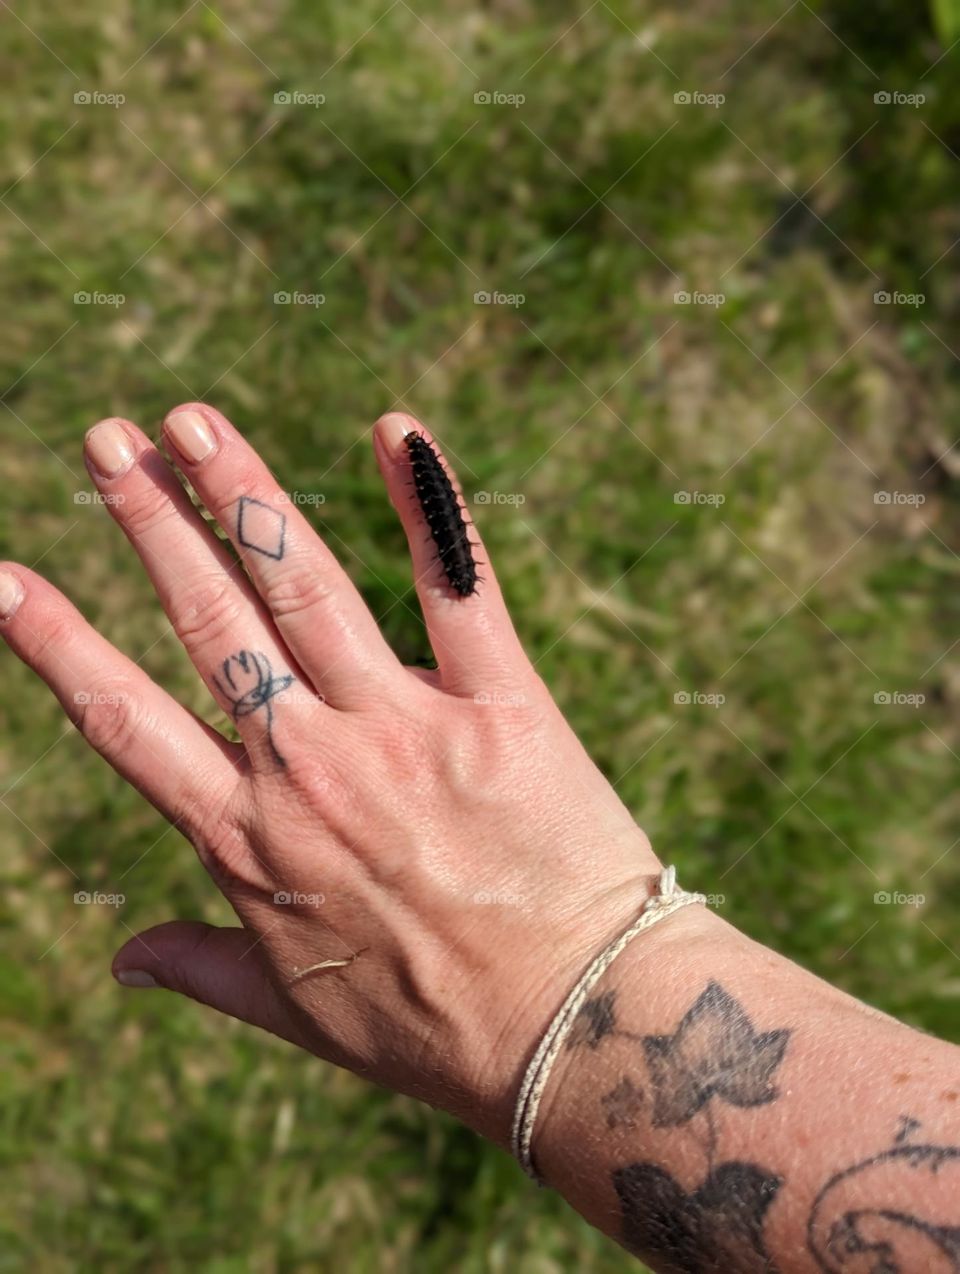 black fuzzy caterpillar crawling on women's pinky finger on a nature hike by a waterfall tattooed fingers